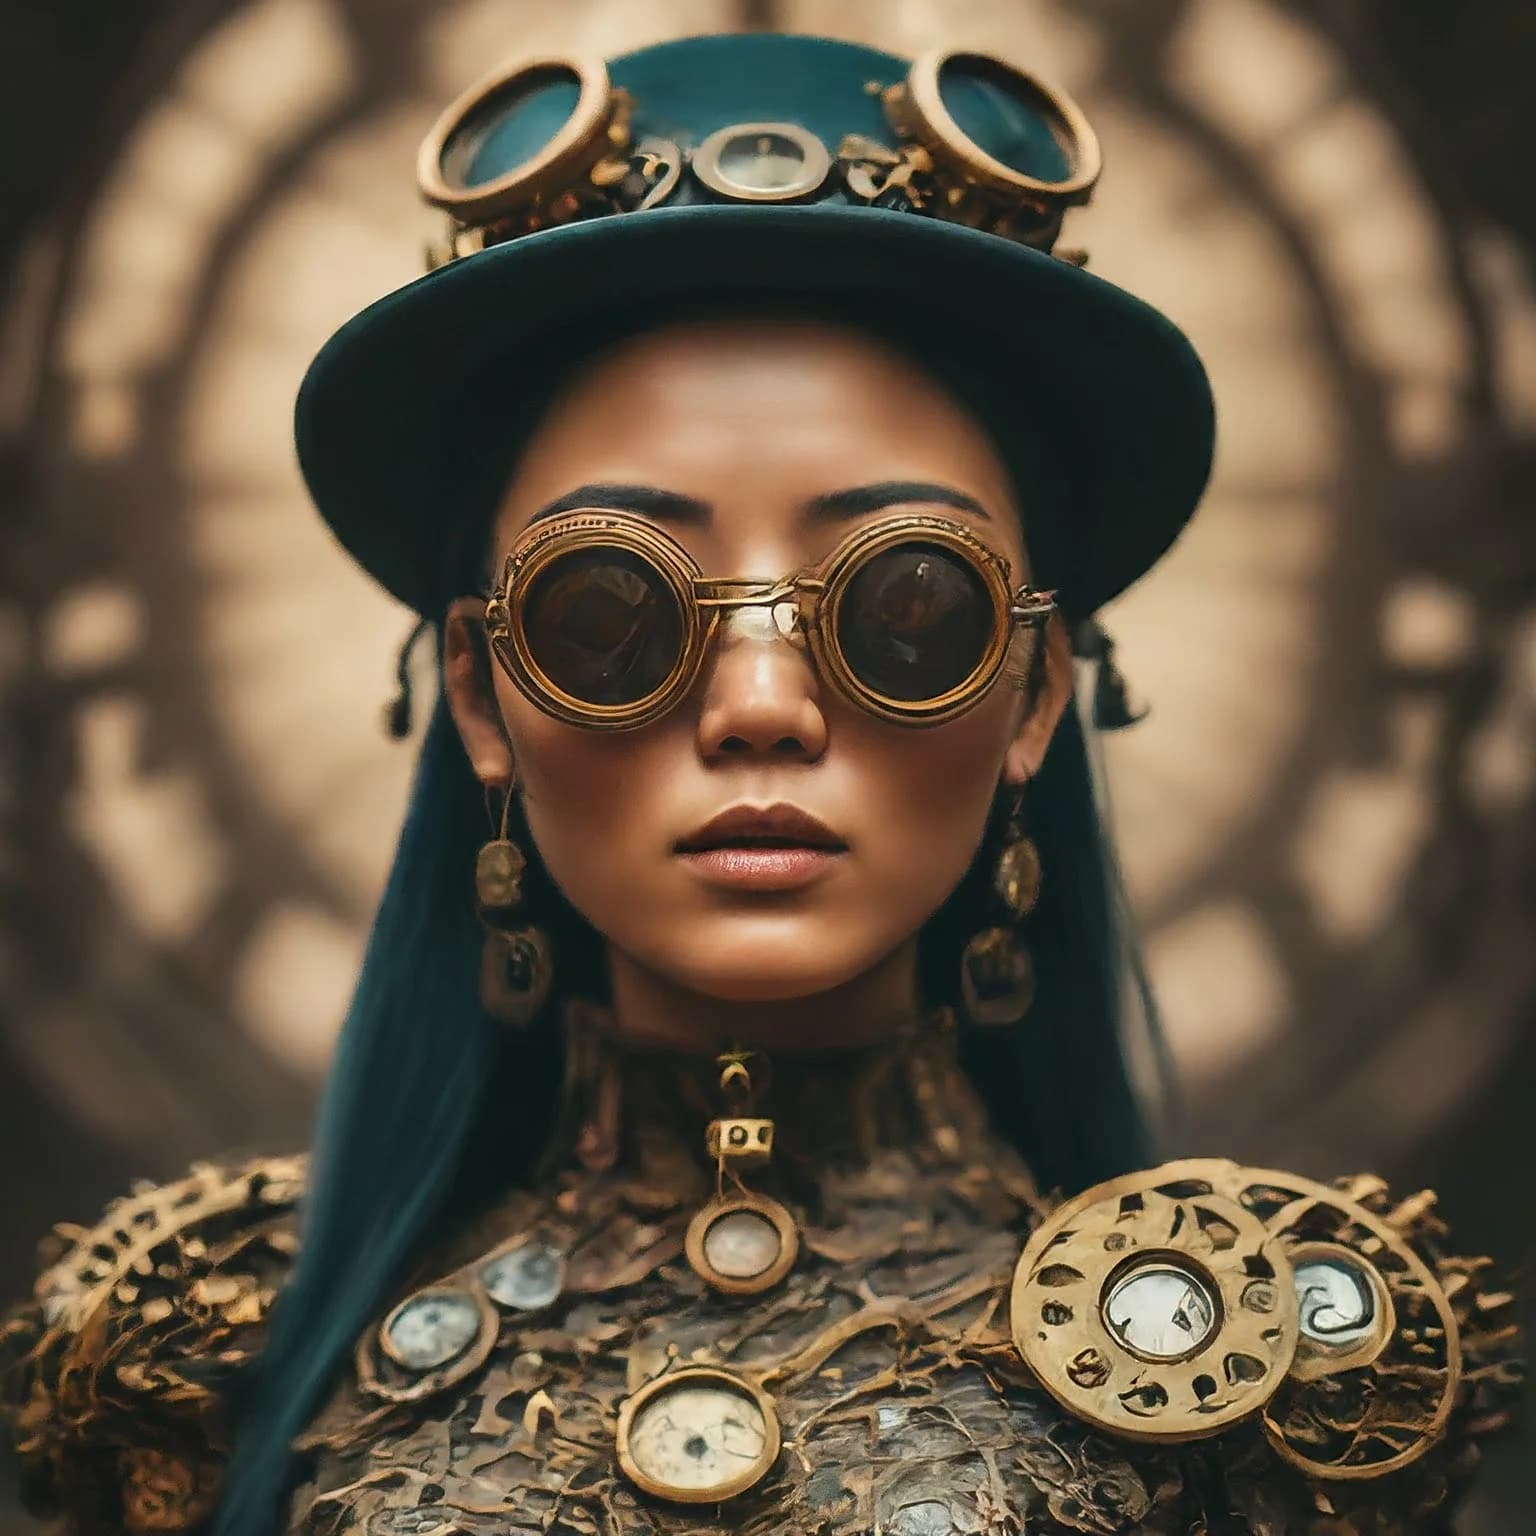 Prompt: “Generate an image of a fashion show in steampunk style digital art. Zoom in on their face.”